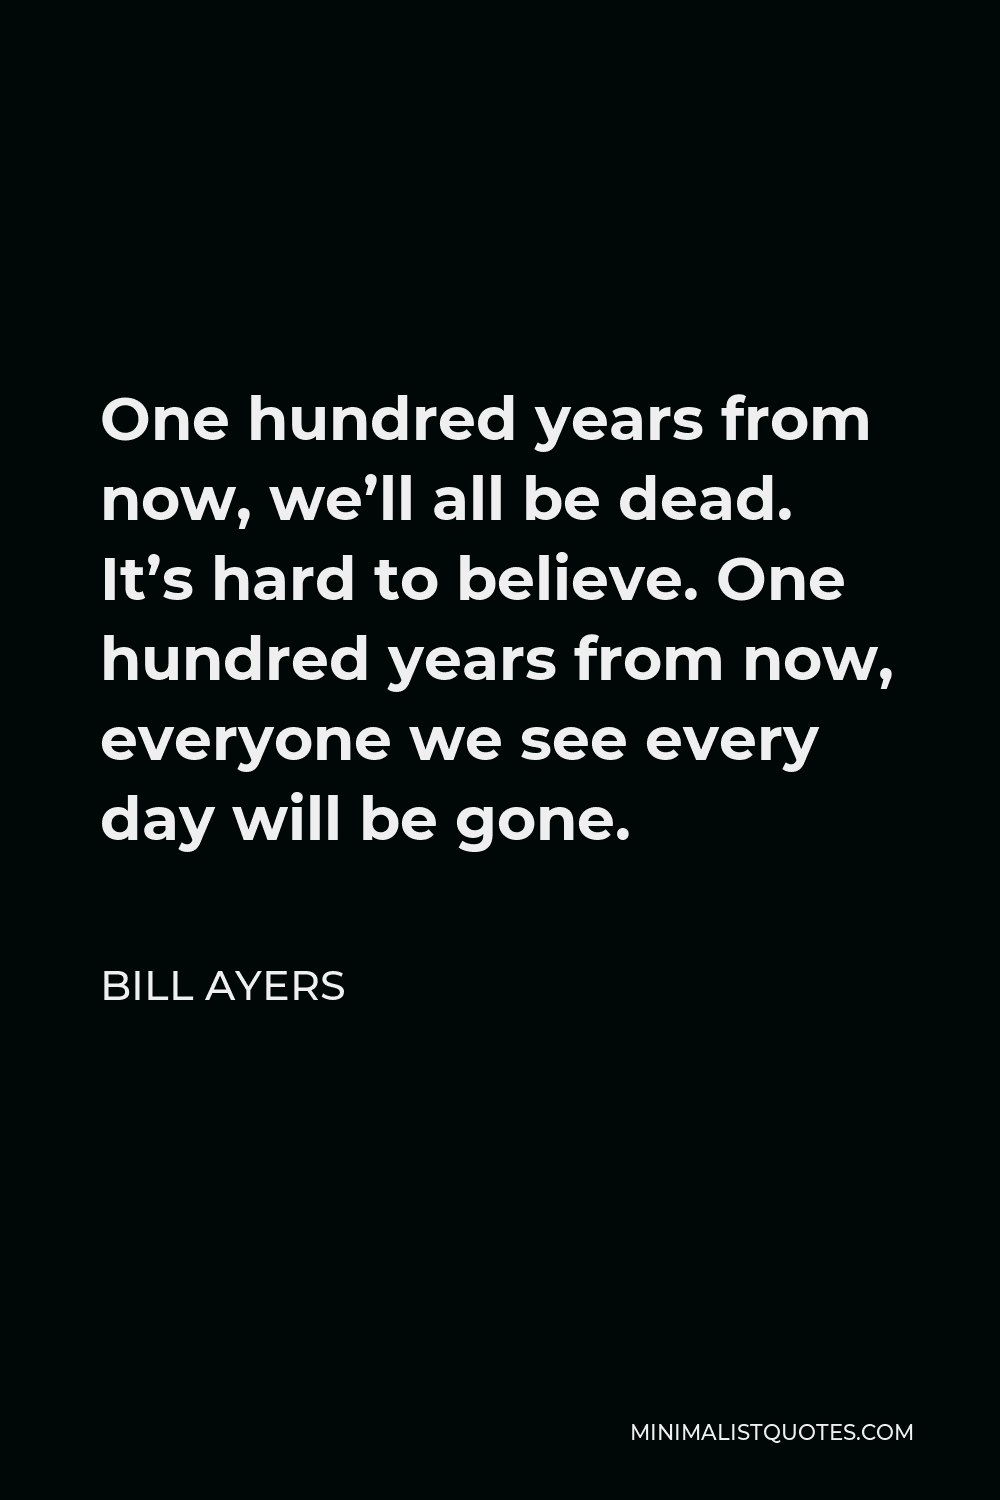 Bill Ayers Quote - One hundred years from now, we’ll all be dead. It’s hard to believe. One hundred years from now, everyone we see every day will be gone.